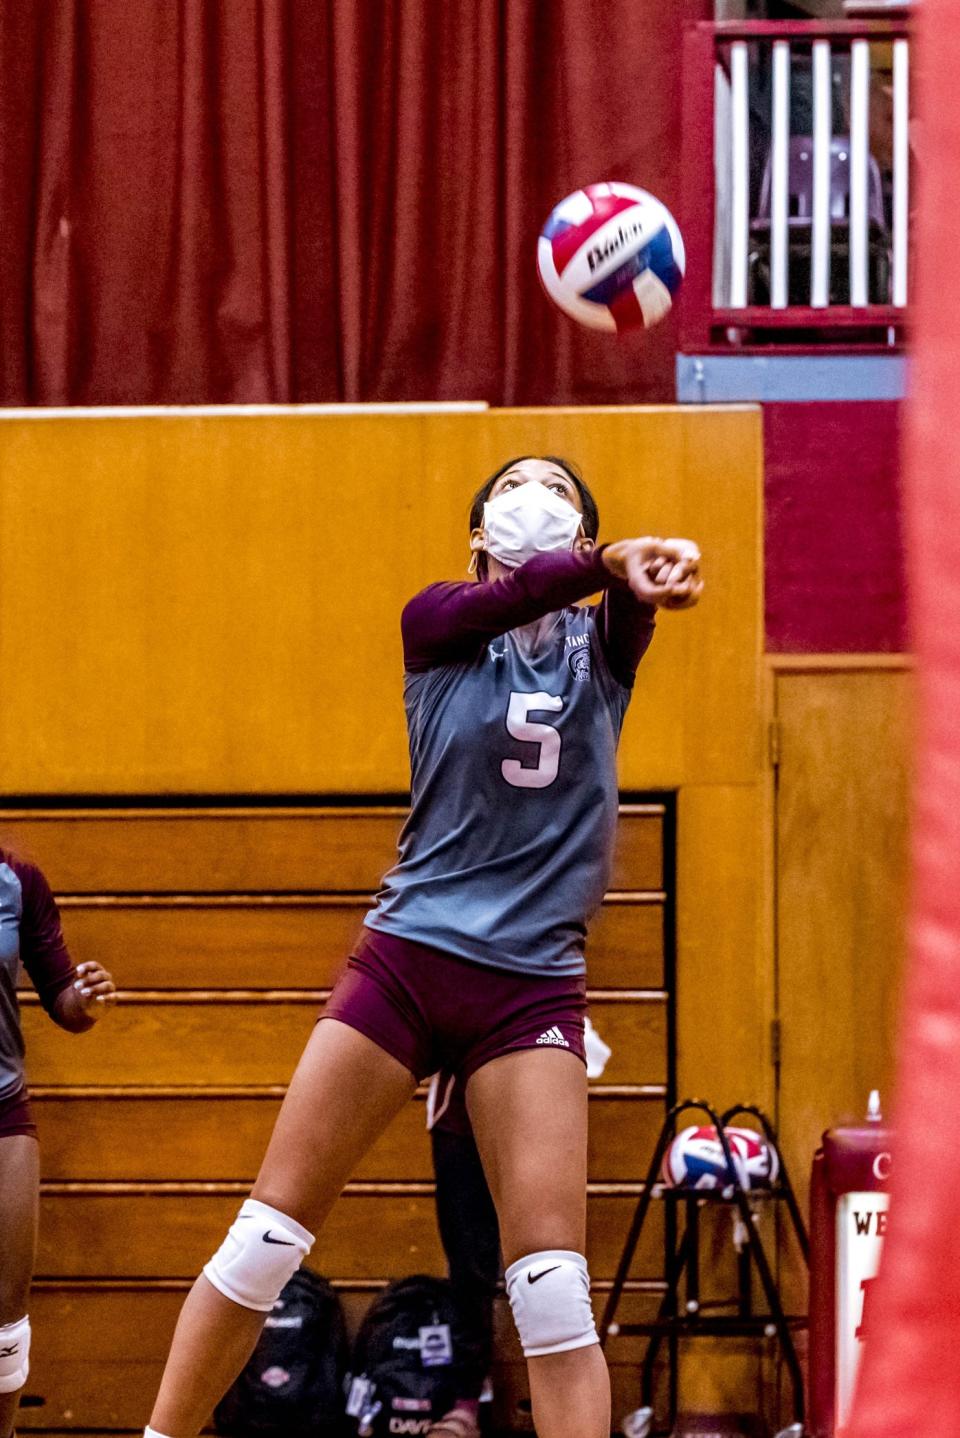 Ali James bumps the ball over the net for Bishop Stang